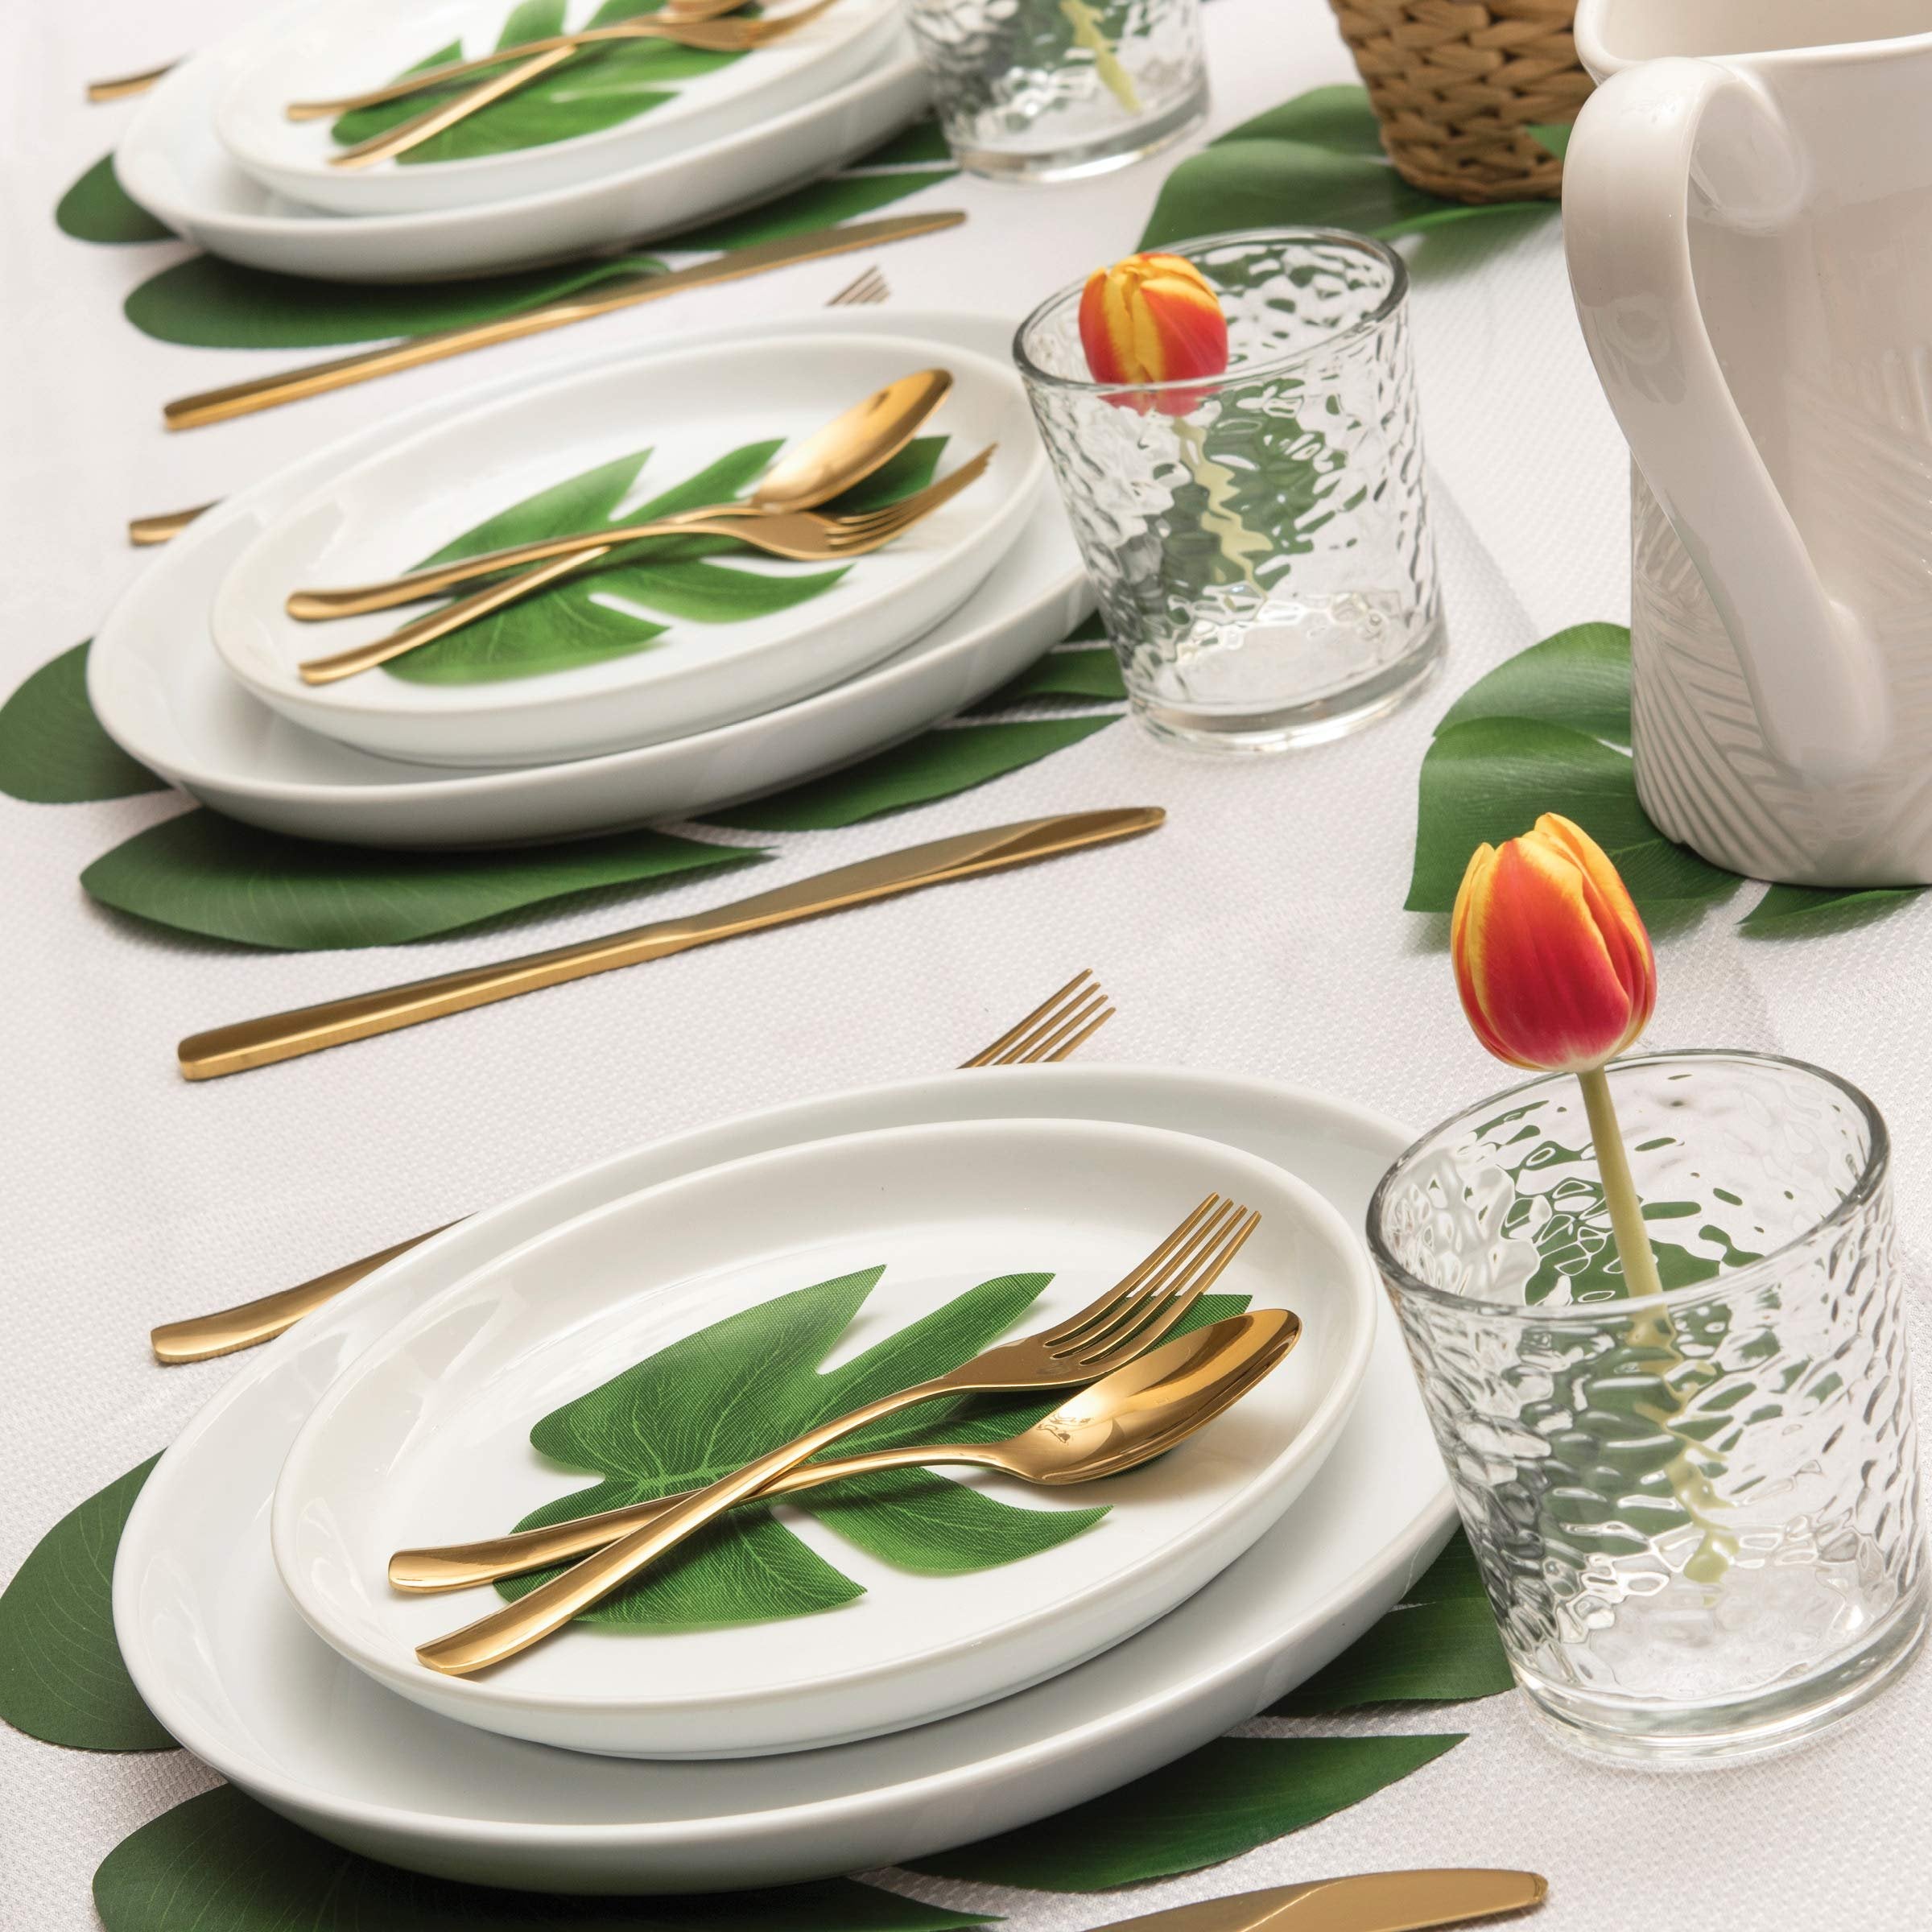 Prextex 30 Artificial Palm Leaves for Party Table Decoration, Imitation Tropical Leaf Placemats Table Runners or Greenery Décor for Events, Beach Theme or Jungle Party Supply (Large, 13.8 x 11.4 Inch)